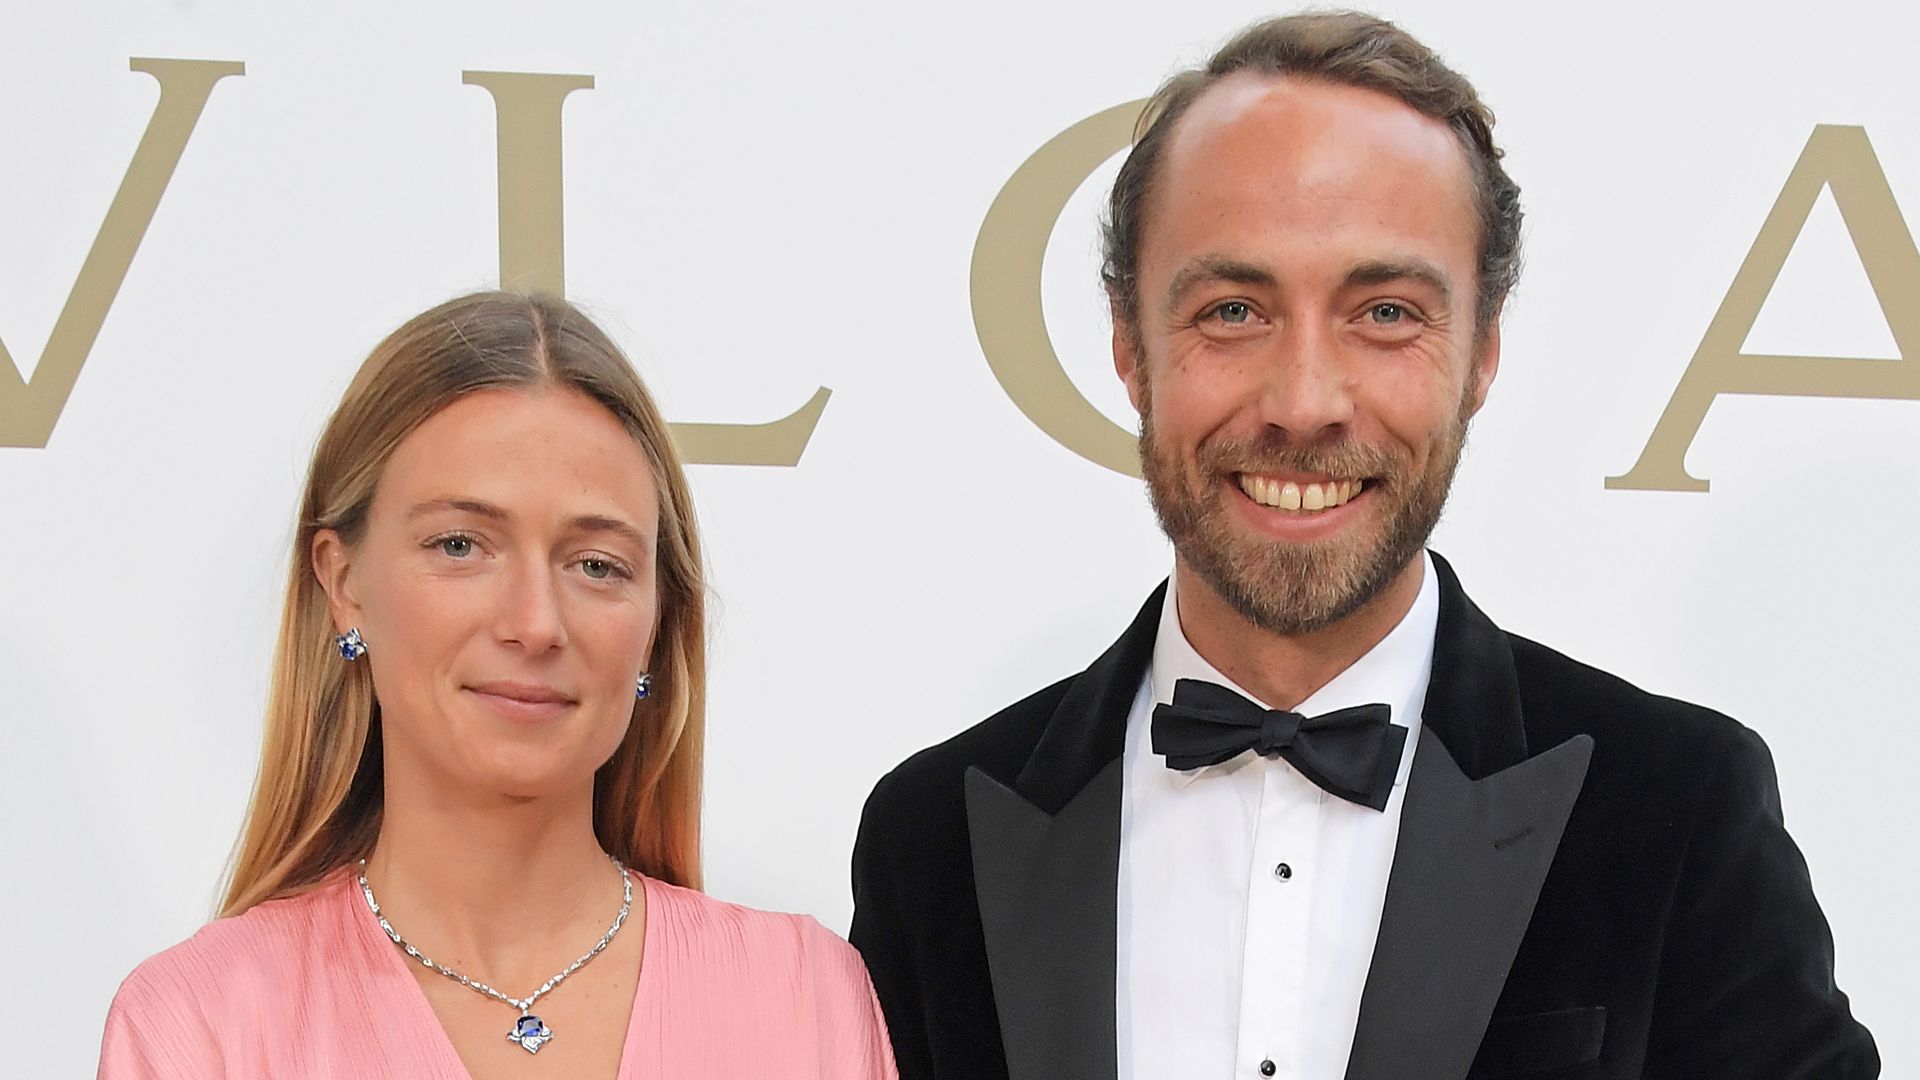 Alizee Thevenet in pink dress and James Middleton in tuxedo